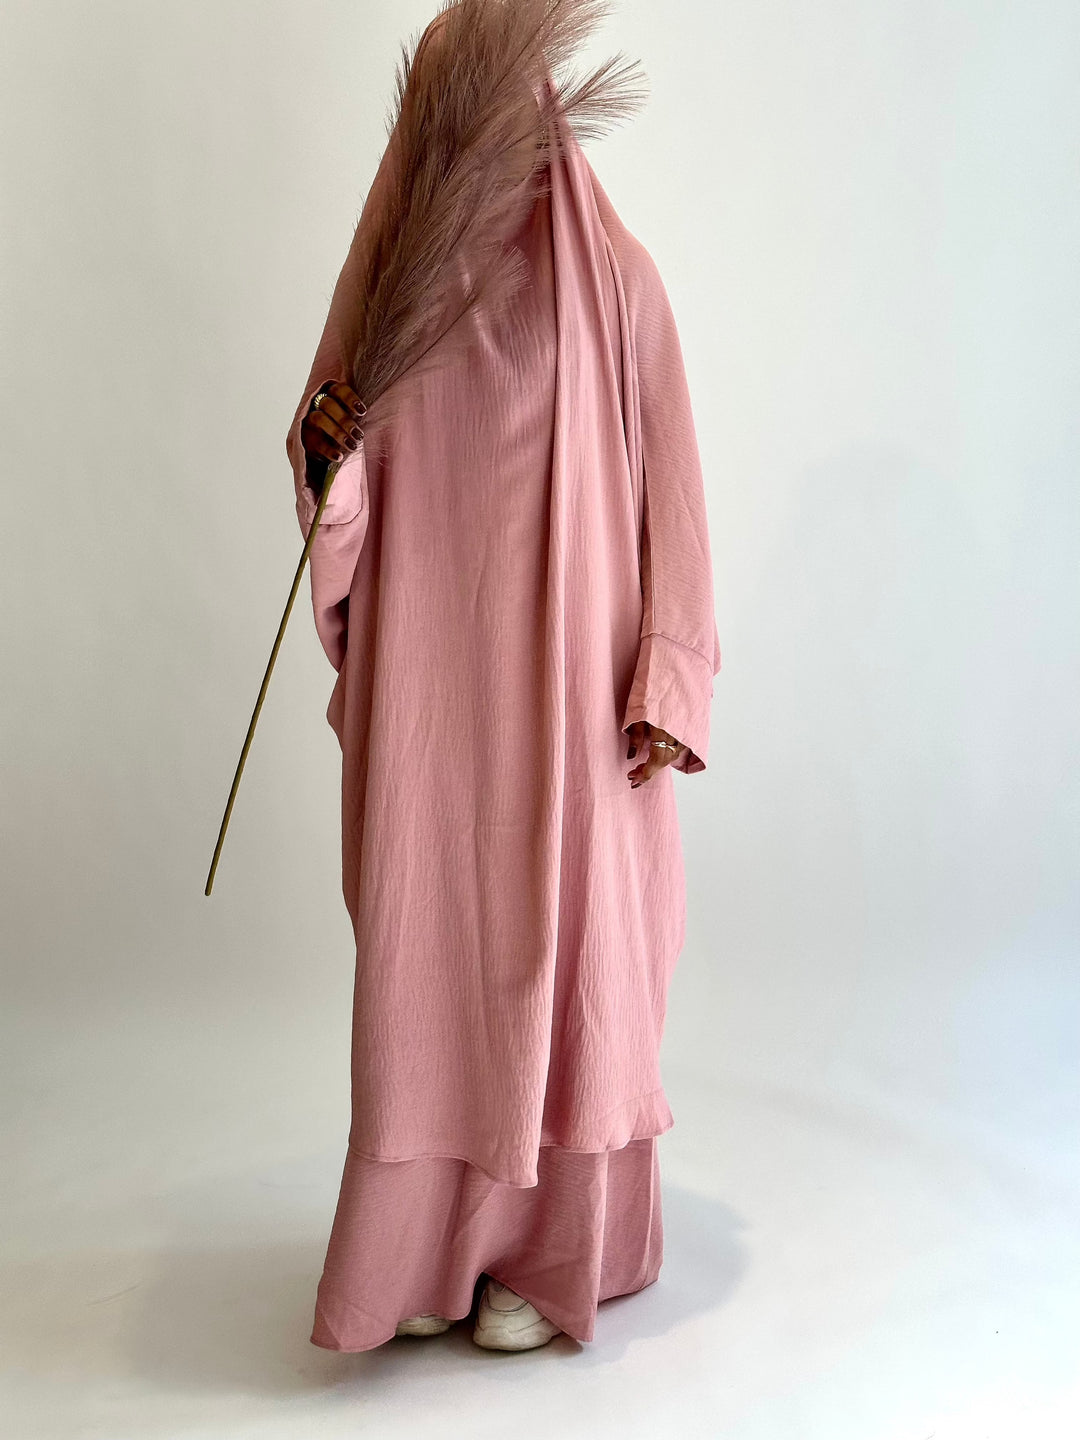 Get trendy with Mariya 2-piece Jilbab - Pink -  available at Voilee NY. Grab yours for $19.99 today!